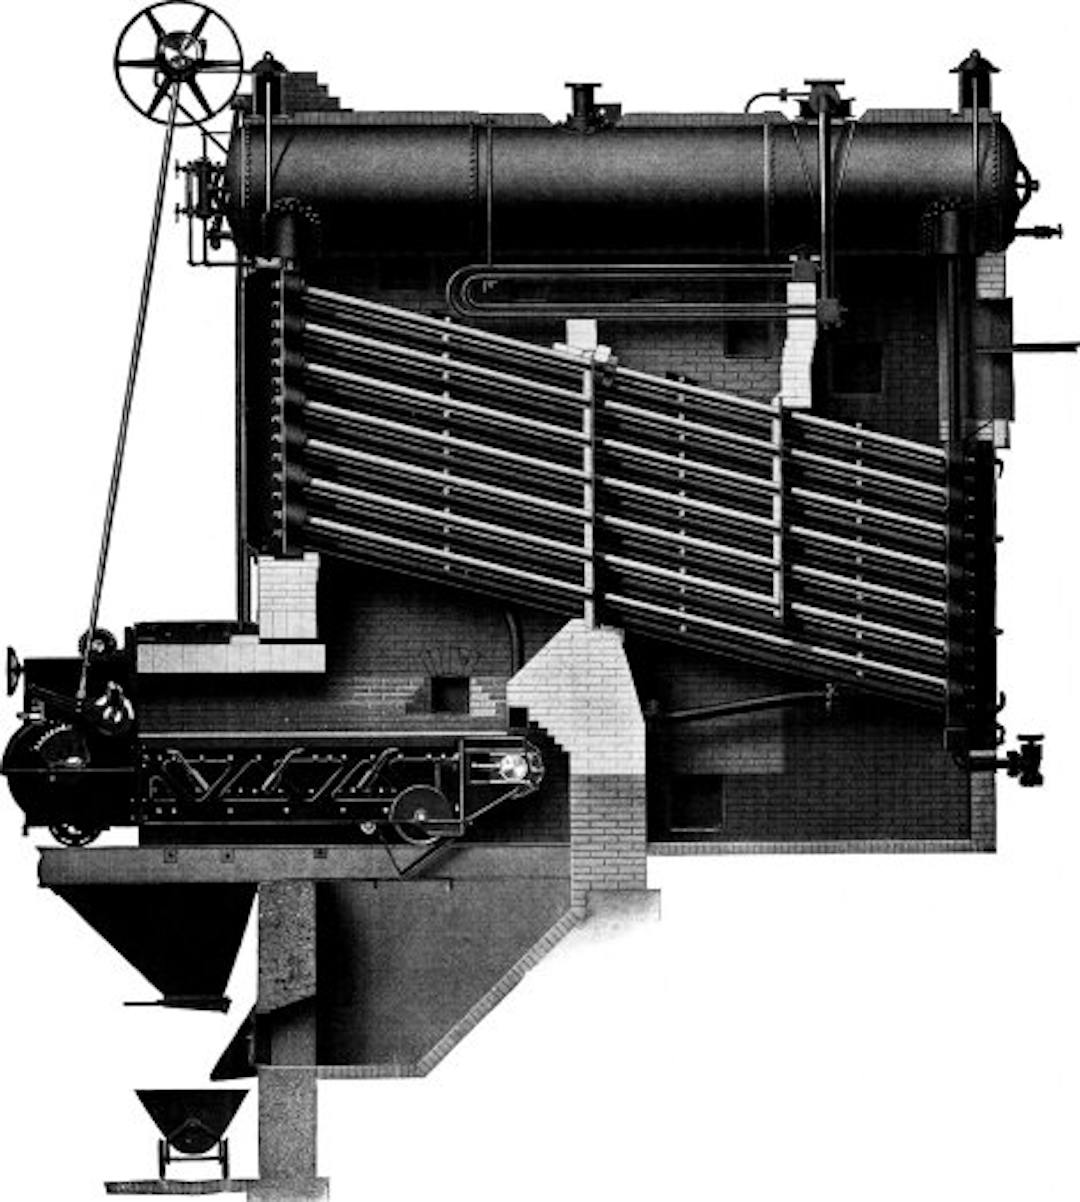 Wrought-steel Vertical Header Longitudinal Drum Babcock & Wilcox Boiler, Equipped with Babcock & Wilcox Superheater and Babcock & Wilcox Chain Grate Stoker